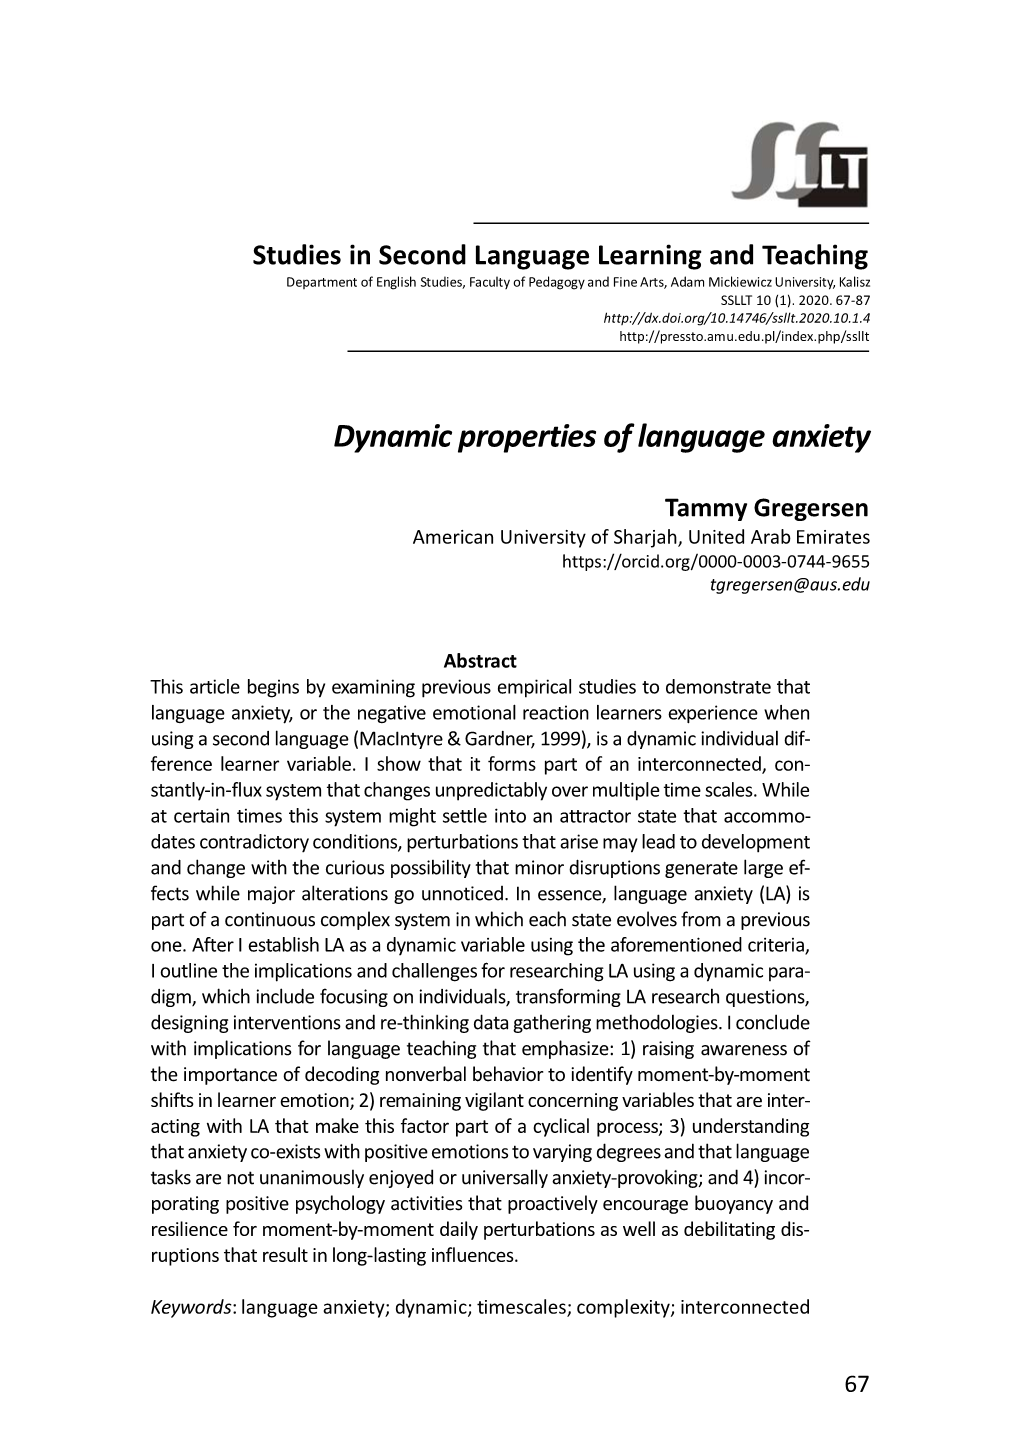 Dynamic Properties of Language Anxiety